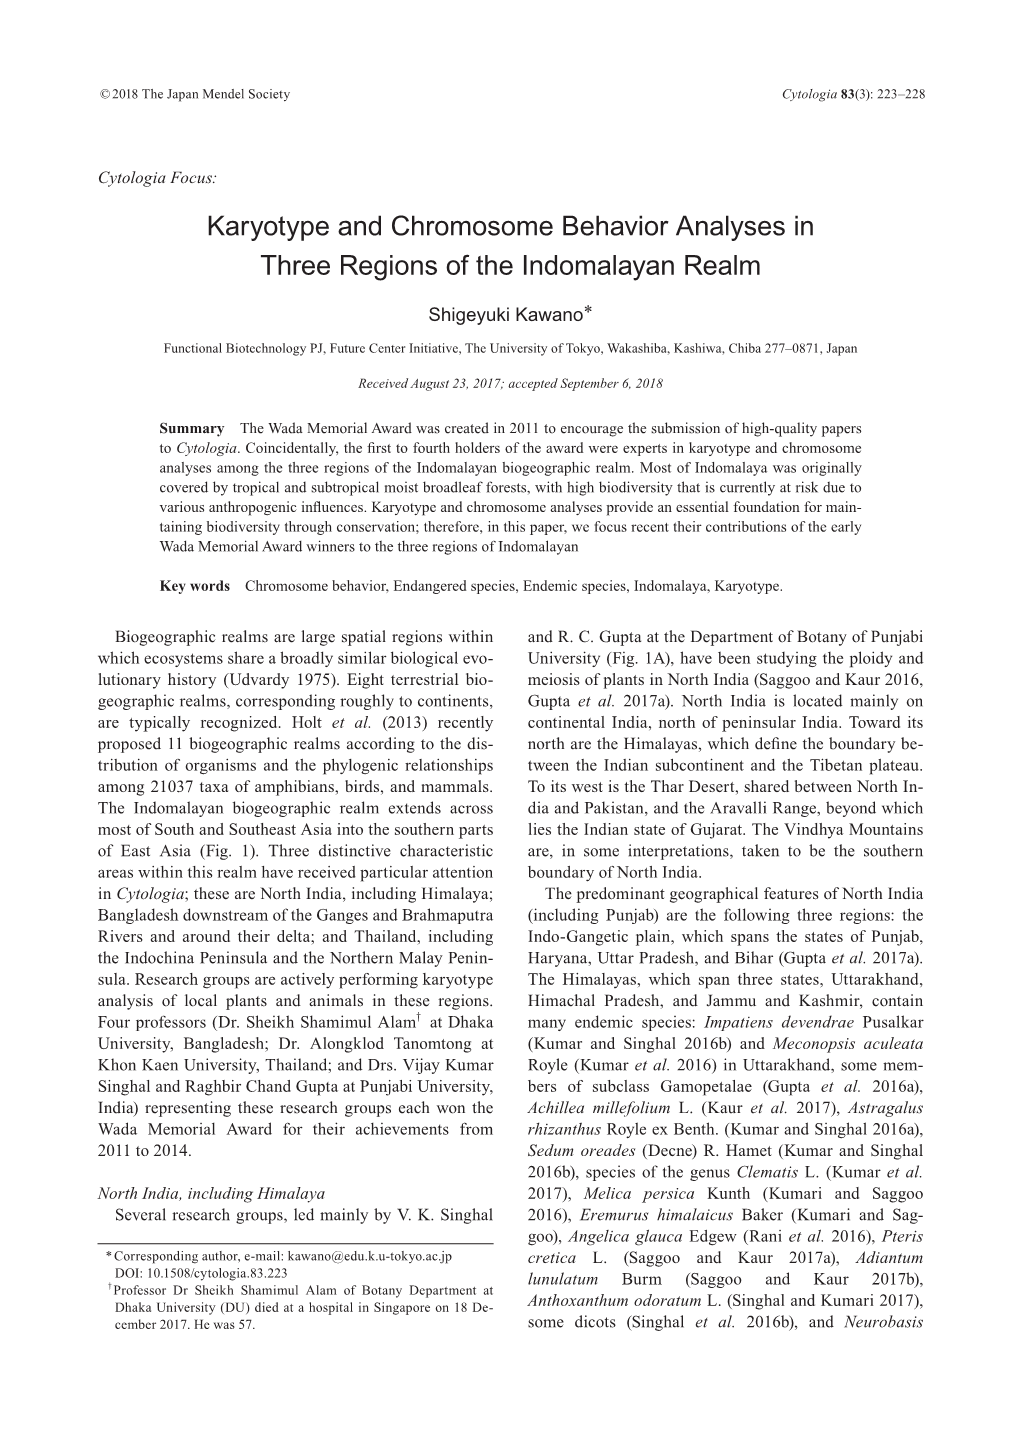 Karyotype and Chromosome Behavior Analyses in Three Regions of the Indomalayan Realm